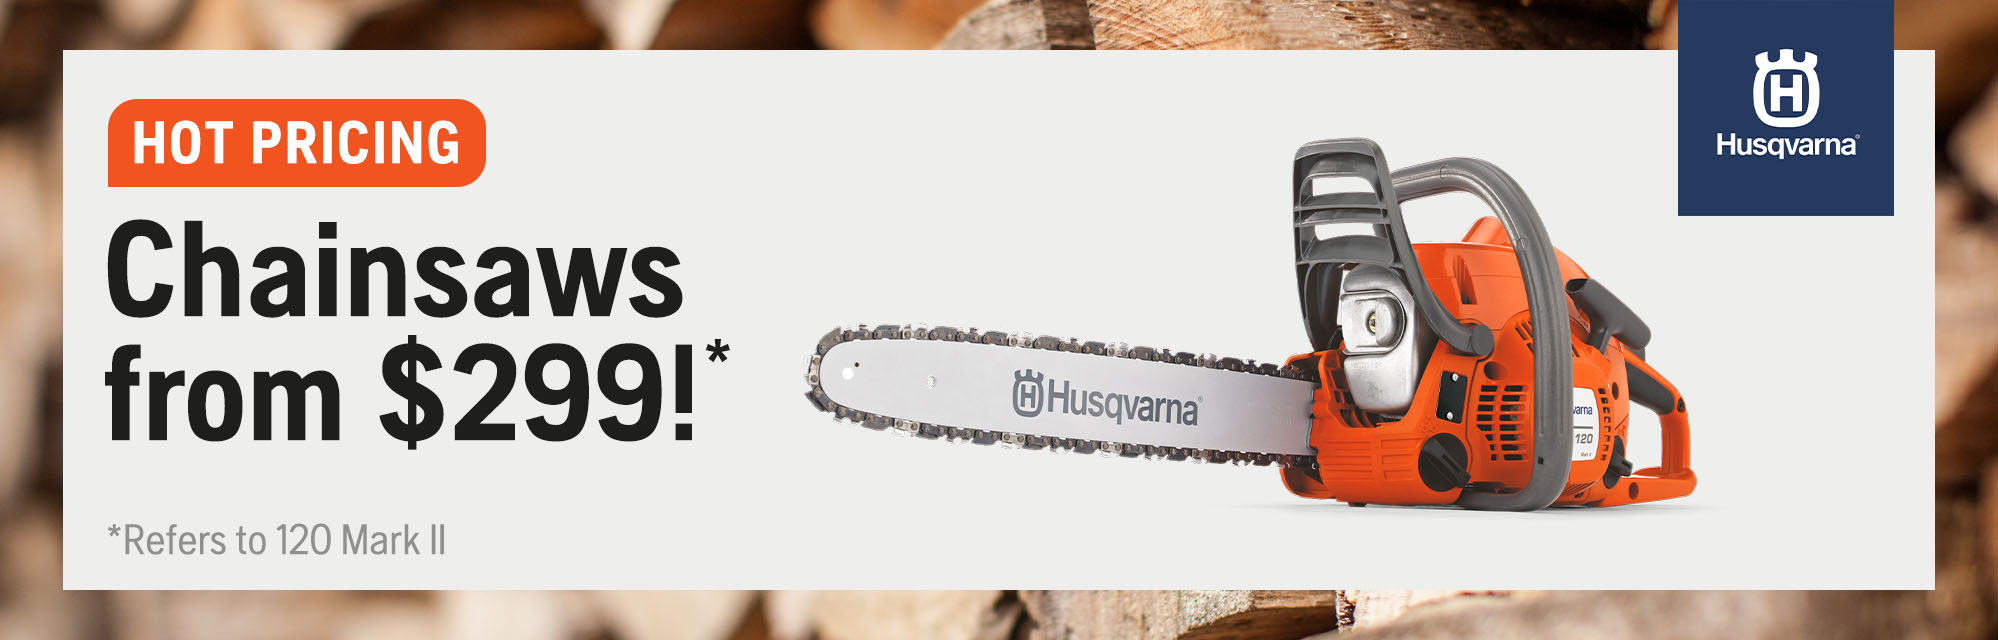 Chainsaws from $299!